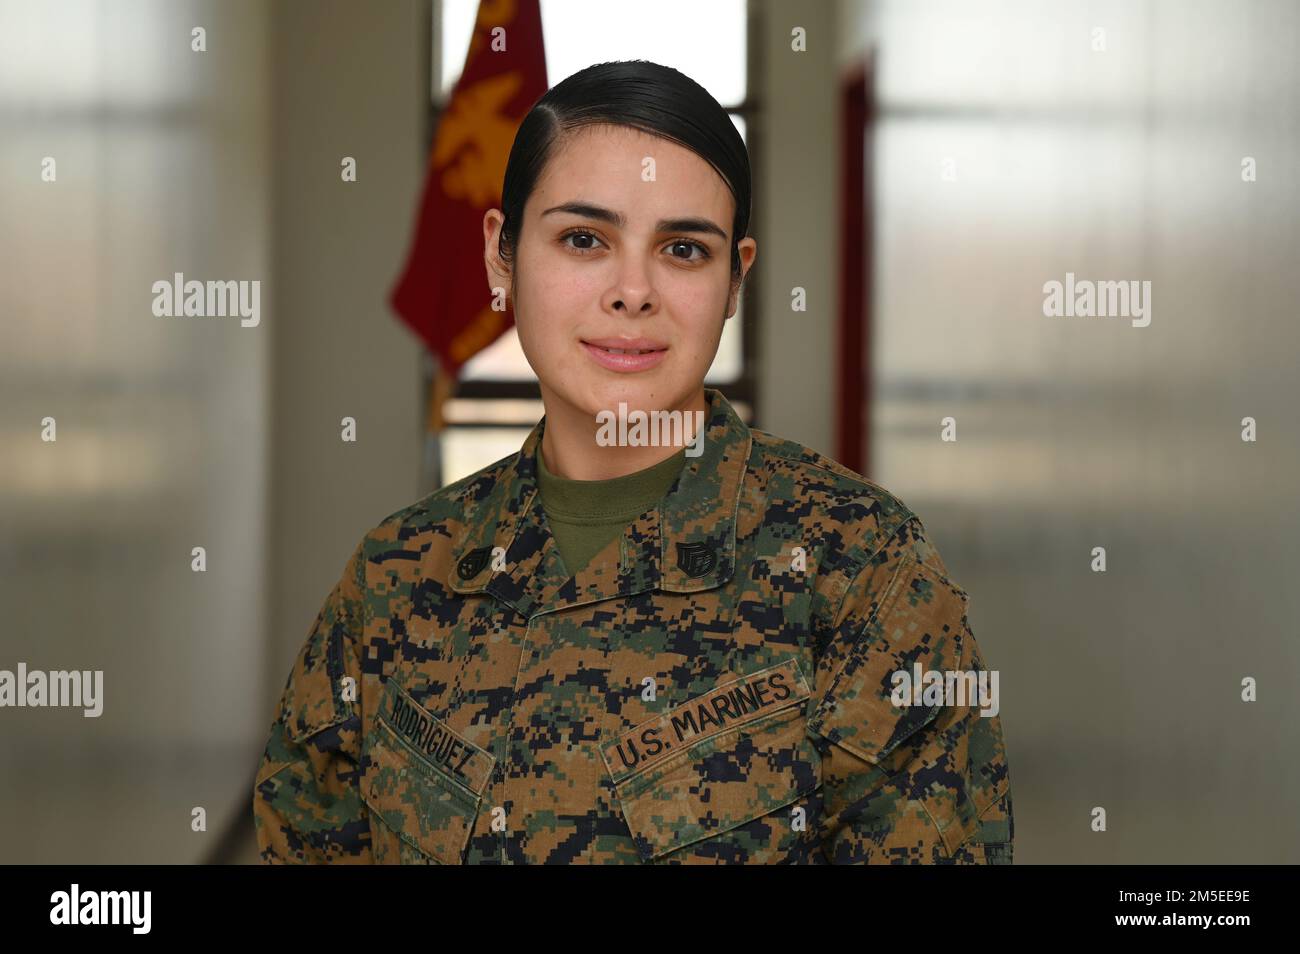 U.S. Marine Corps Staff Sgt. Debora Rodriguez; an administrative marine assigned to Detachment 2, Supply Company, Combat Logistics Battalion 451, 4th Marine Logistics Group; poses for a portrait on Mar. 7, 2022. Rodruiguez has served her country for more than 11 years and provides administrative support to the Marine Corps Reserves presence on Joint Base Anacostia-Bolling, Washington, D.C. Stock Photo